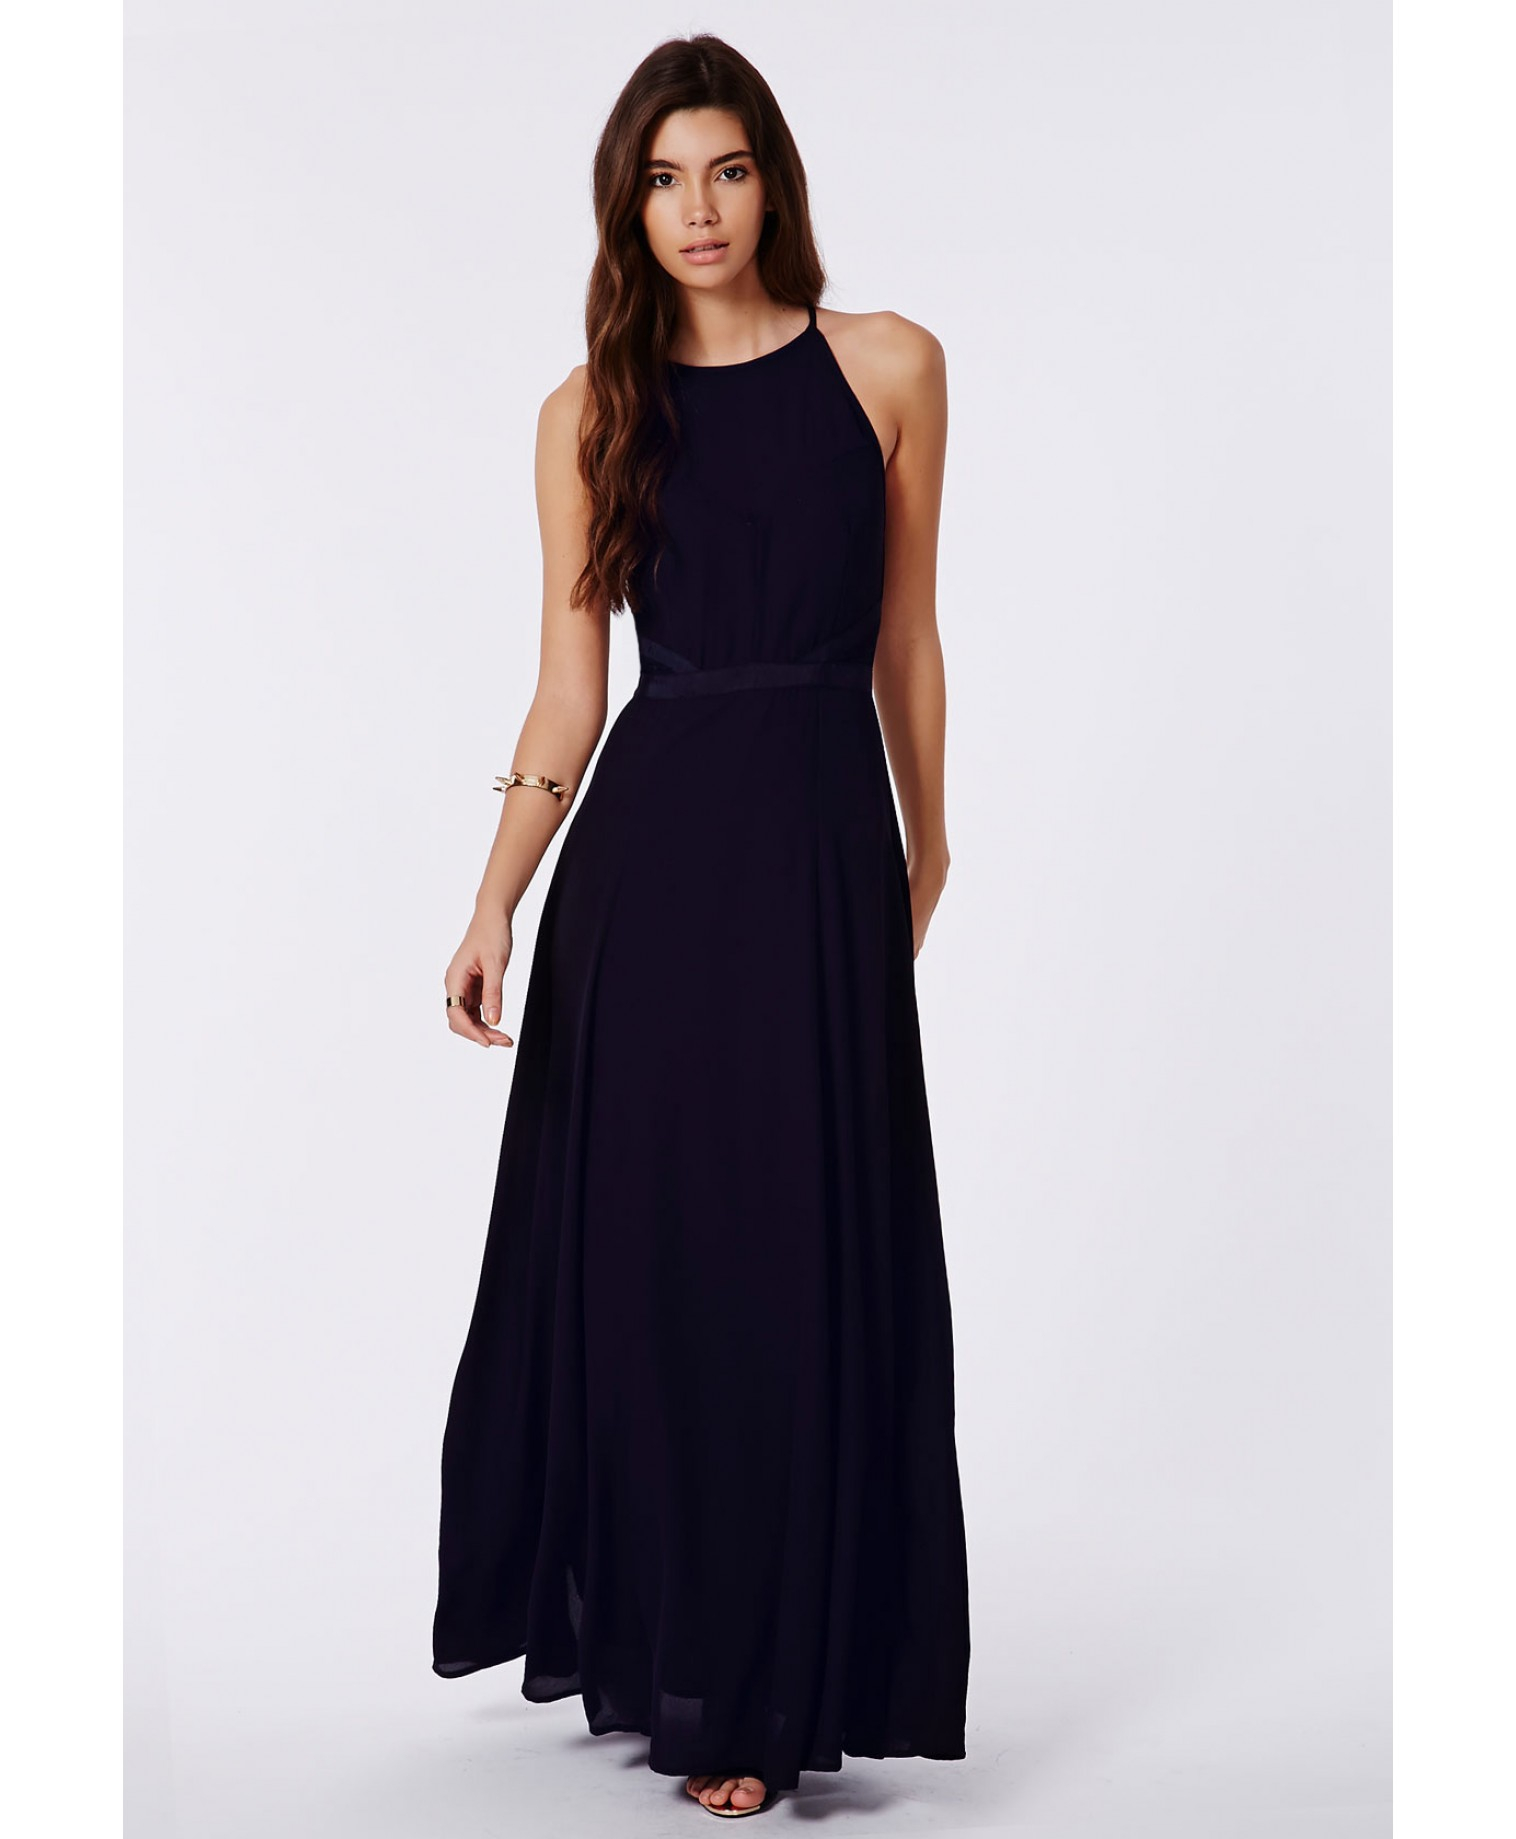 Missguided Kamilinka Lace Backless Maxi Dress In Navy in Blue (navy) | Lyst